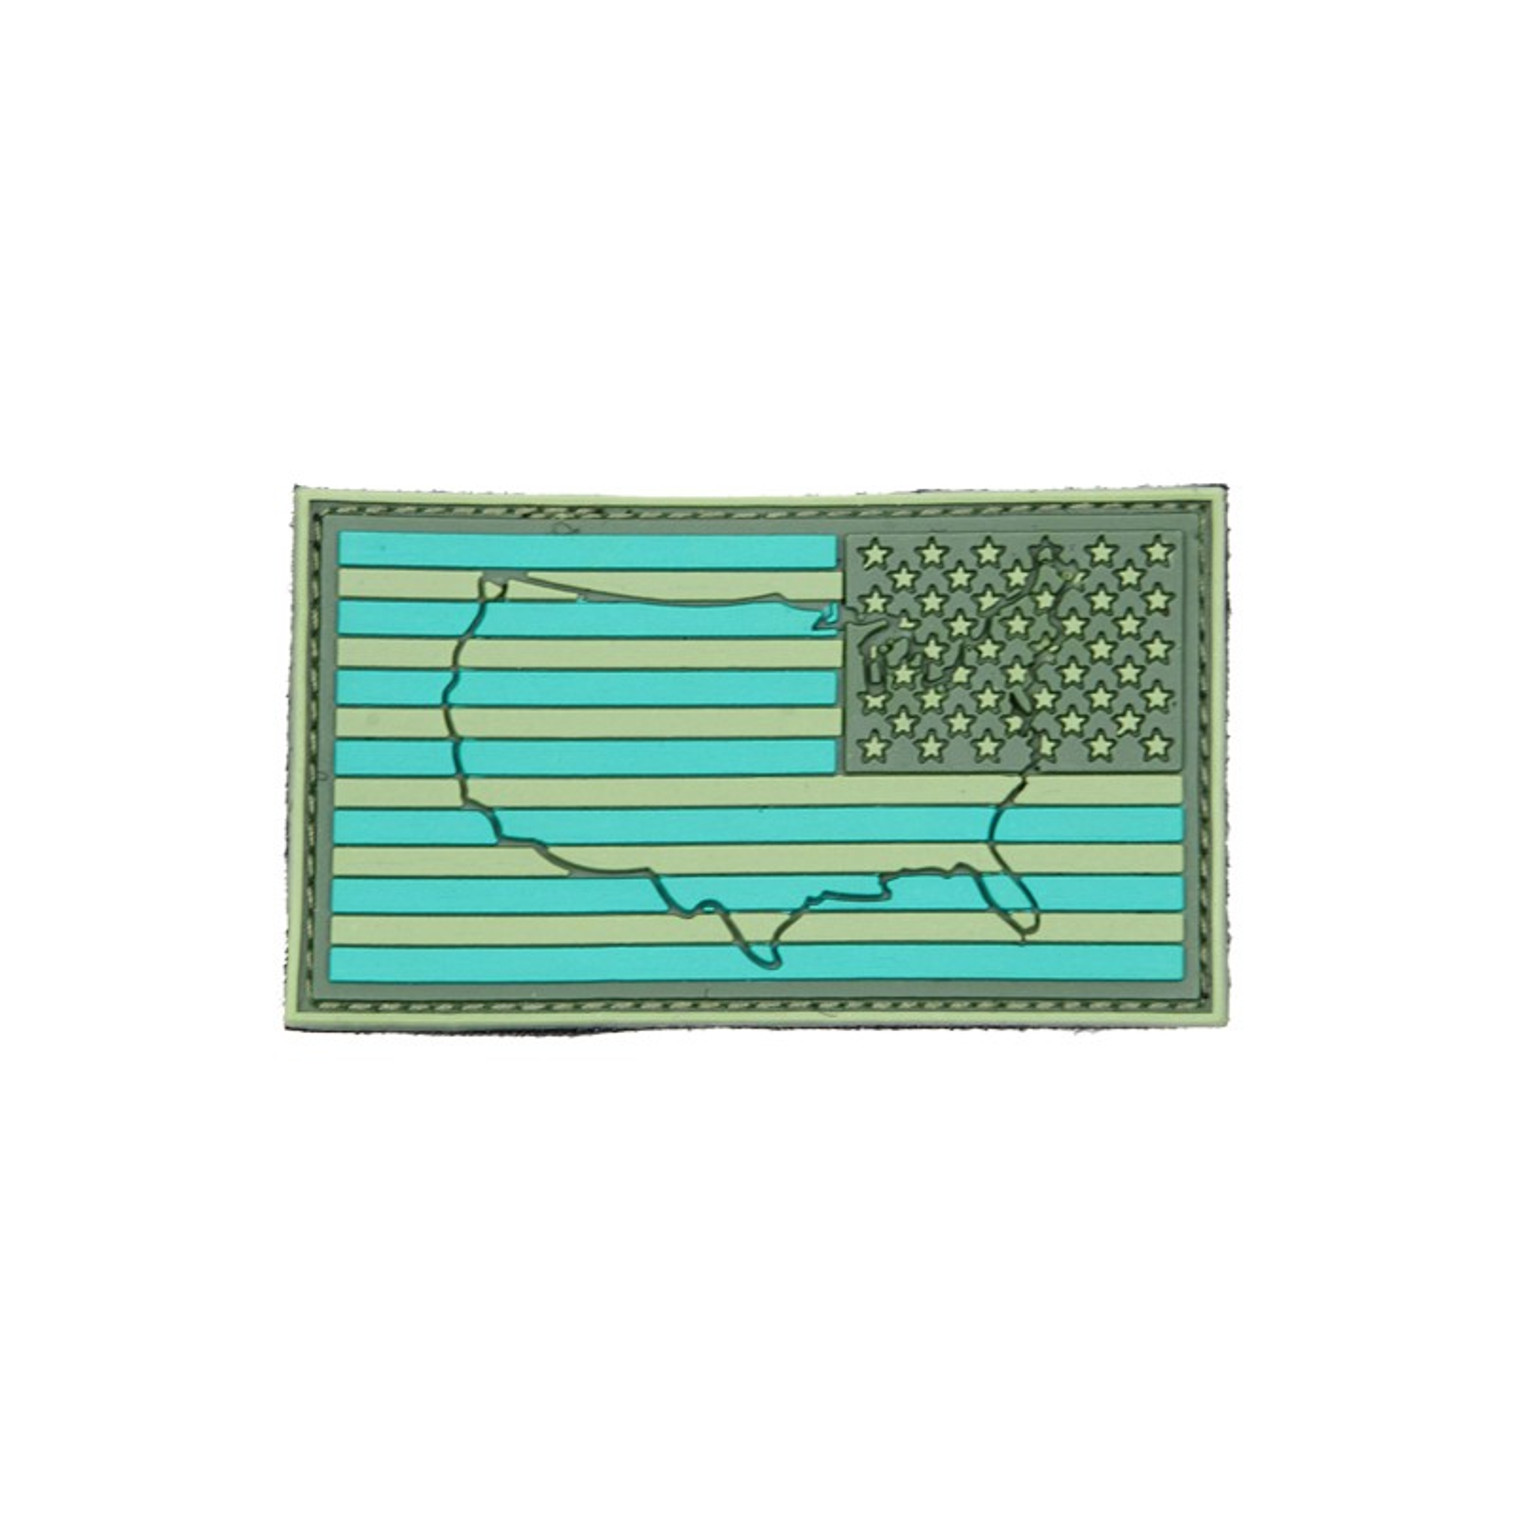 US Flag - Green Reverse (Raised) - Morale Patch